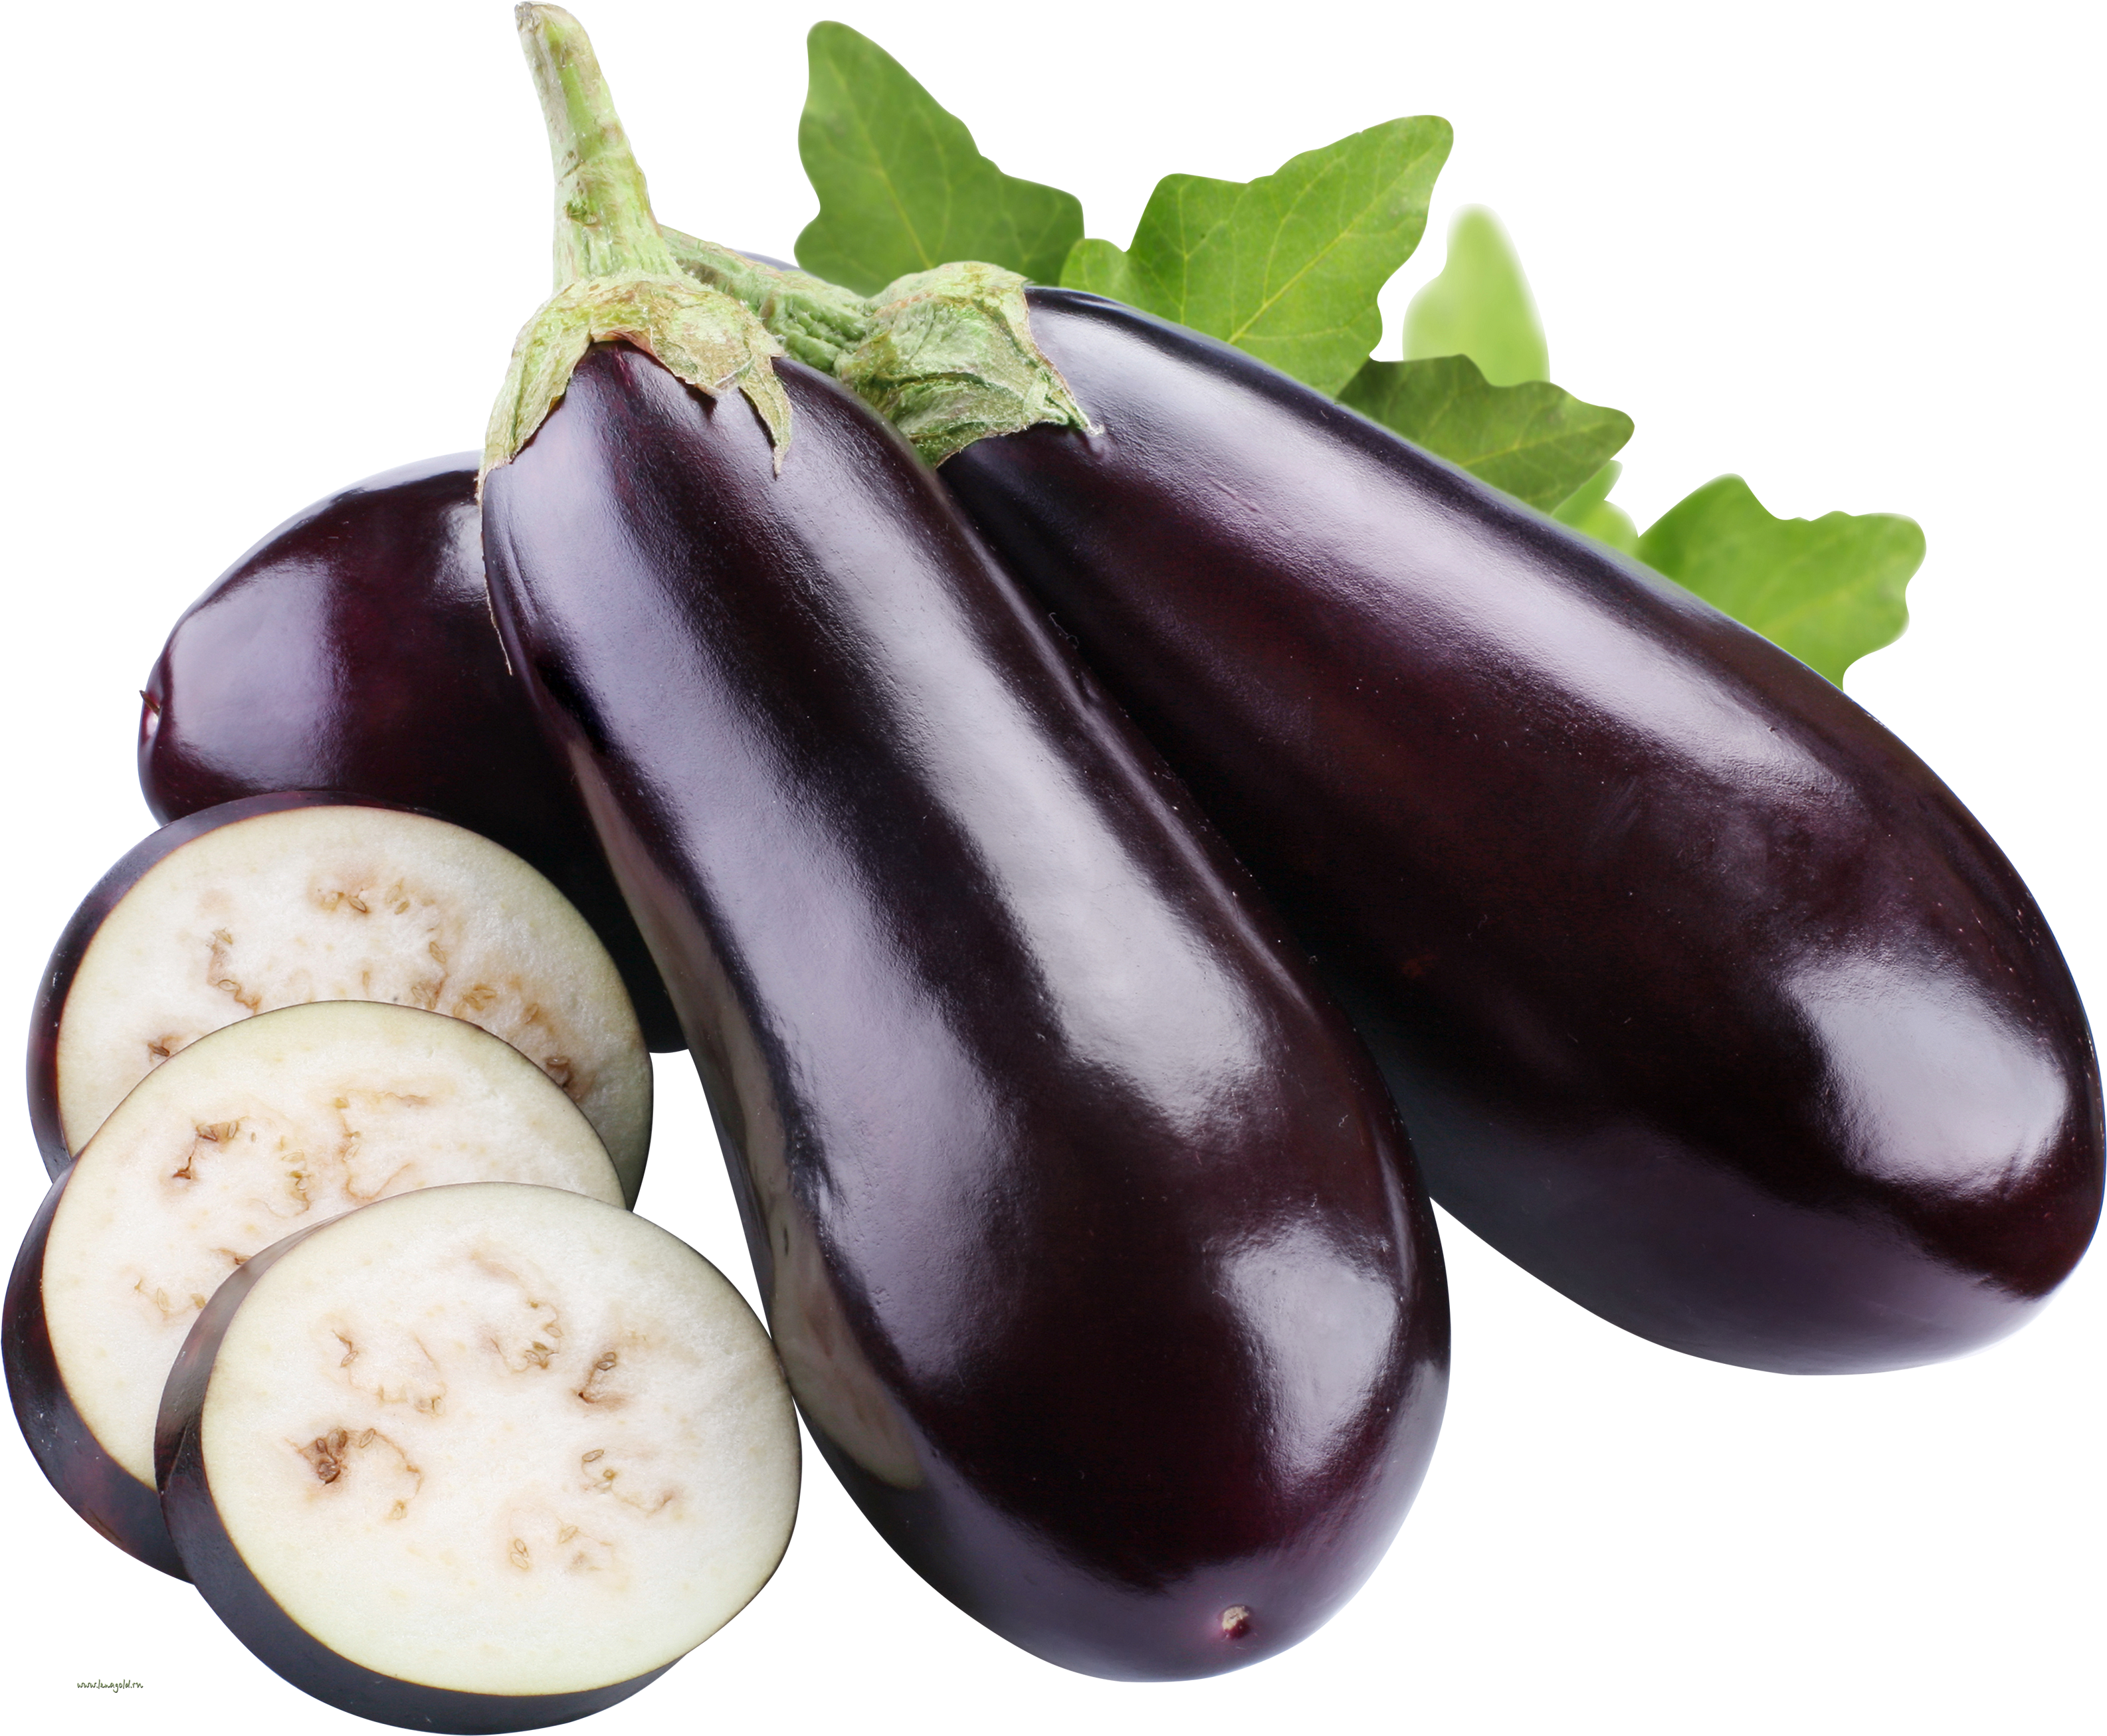 A Group Of Eggplants With Slices Of Eggplant